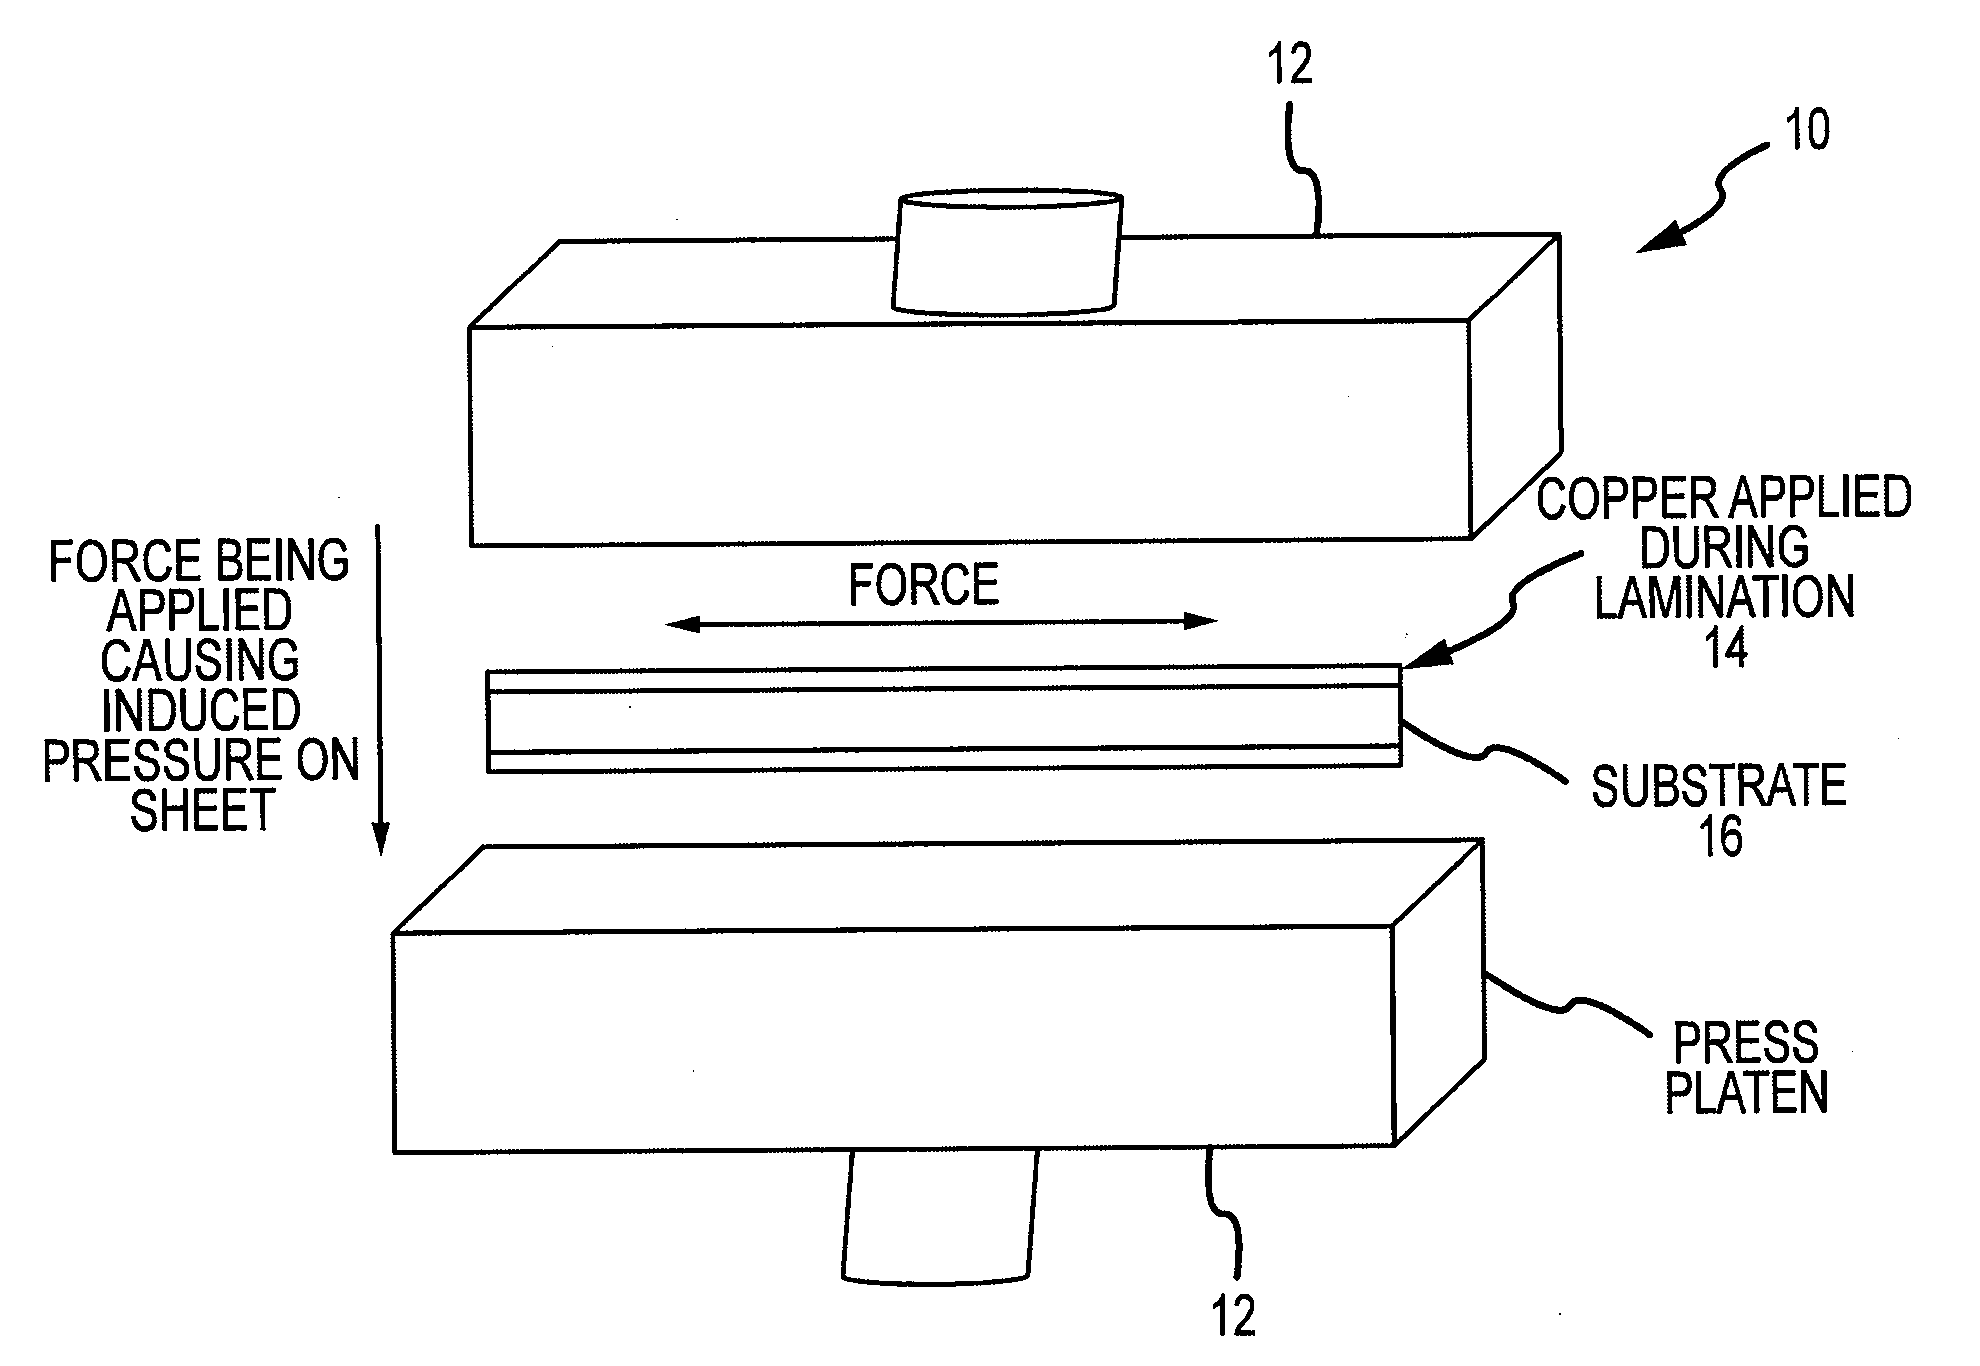 Direct emulsion process for making printed circuits